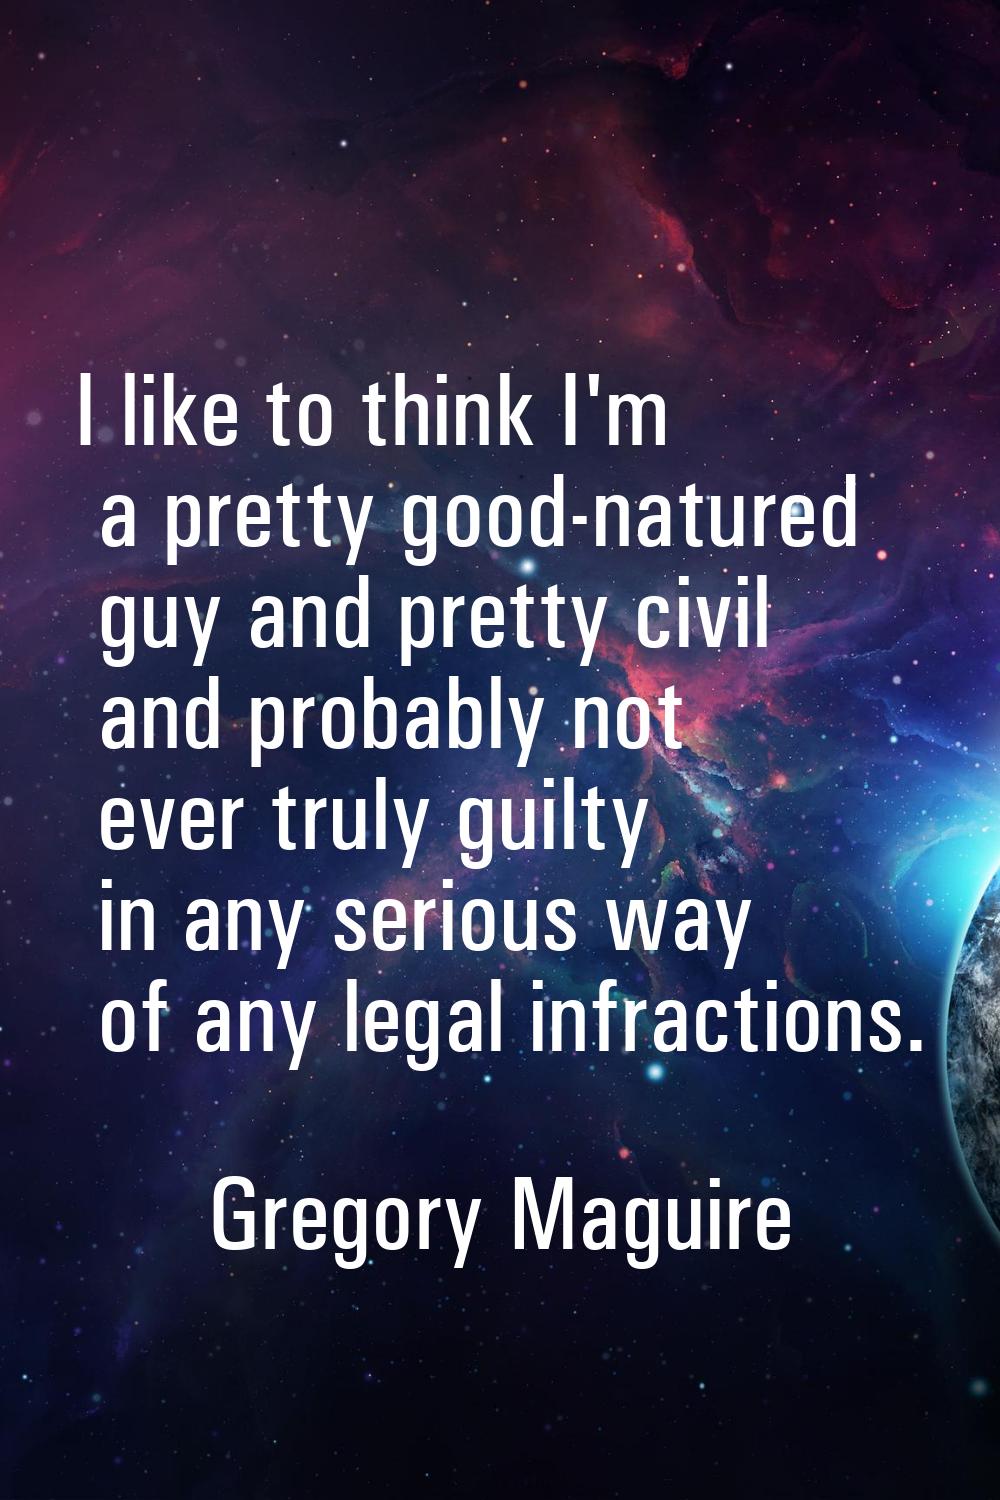 I like to think I'm a pretty good-natured guy and pretty civil and probably not ever truly guilty i